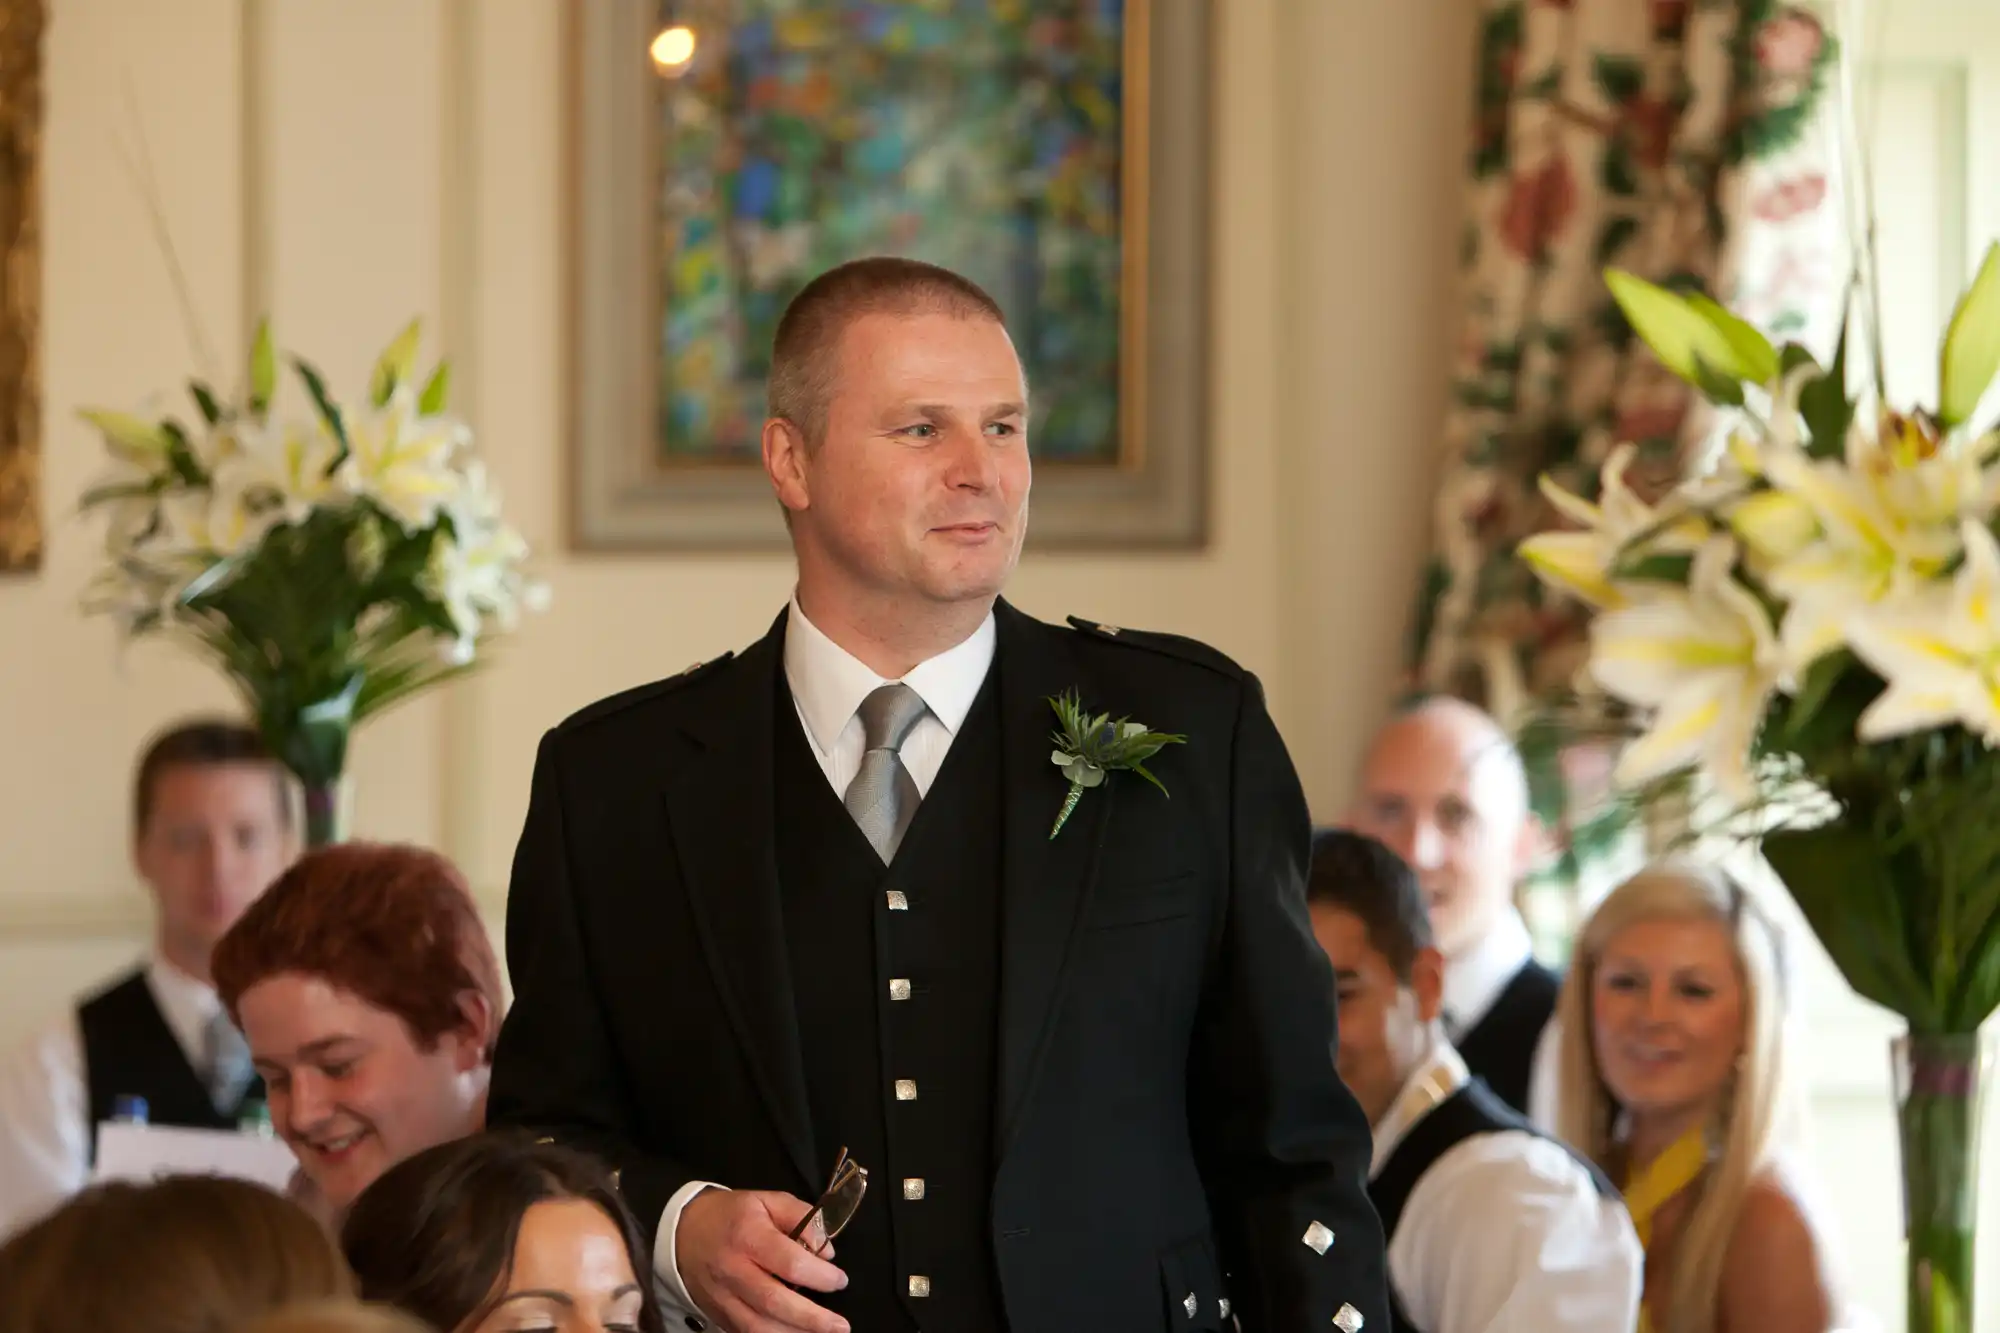 A man in a formal black suit with a boutonniere stands in a room with seated guests and white lilies, looking proud and emotional.